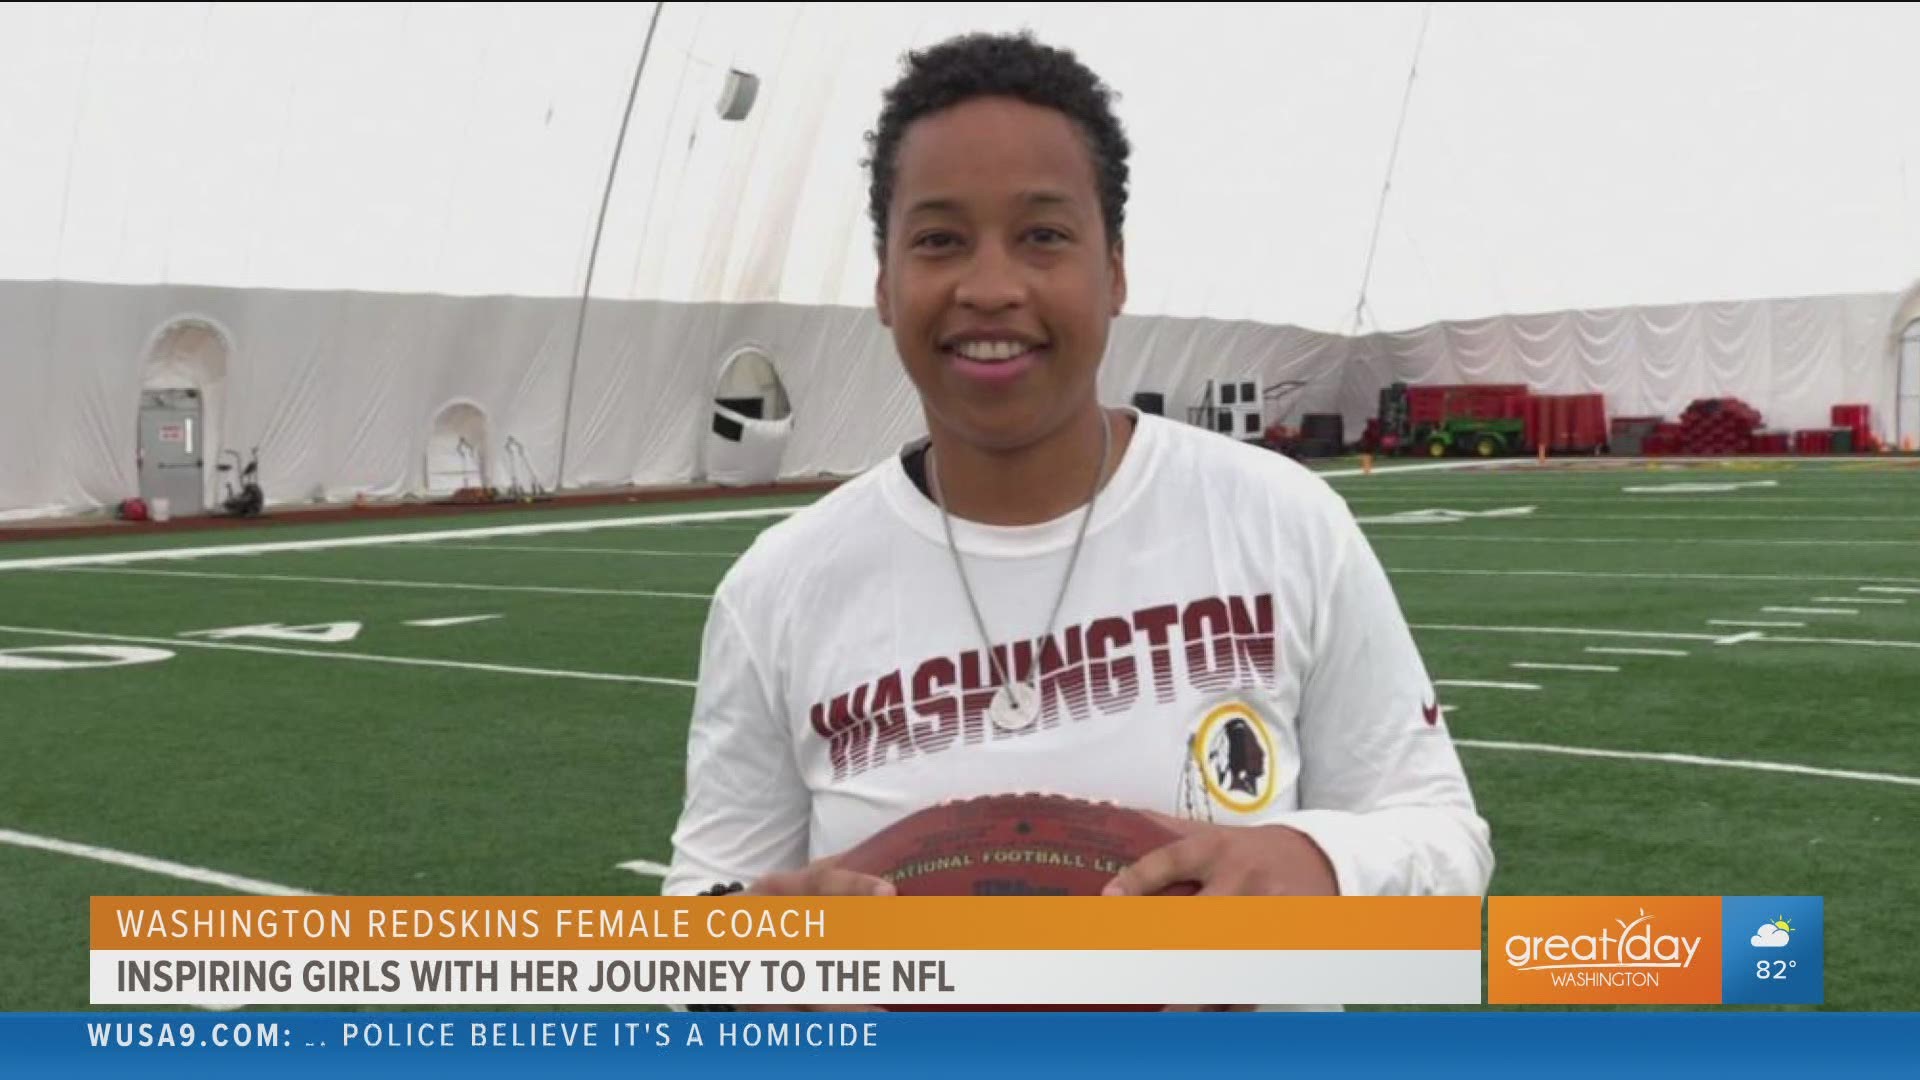 Kristen catches up with coach Jennifer King, a new offensive assistant on the Washington Redskins. King shares her journey to becoming an NFL coach.